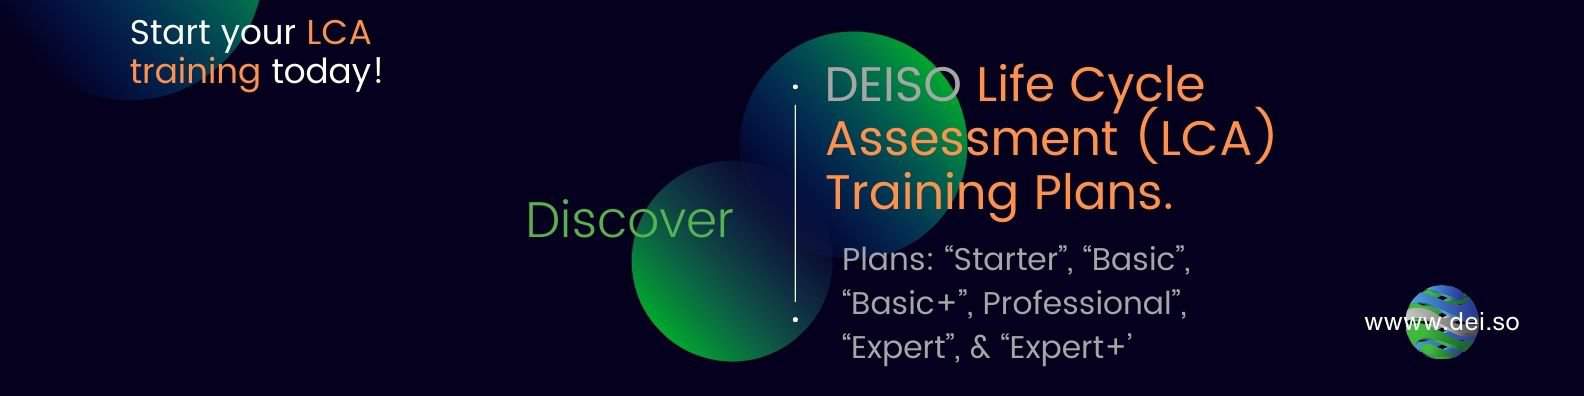 DEISO Life Cycle Assessment LCA training plans and courses